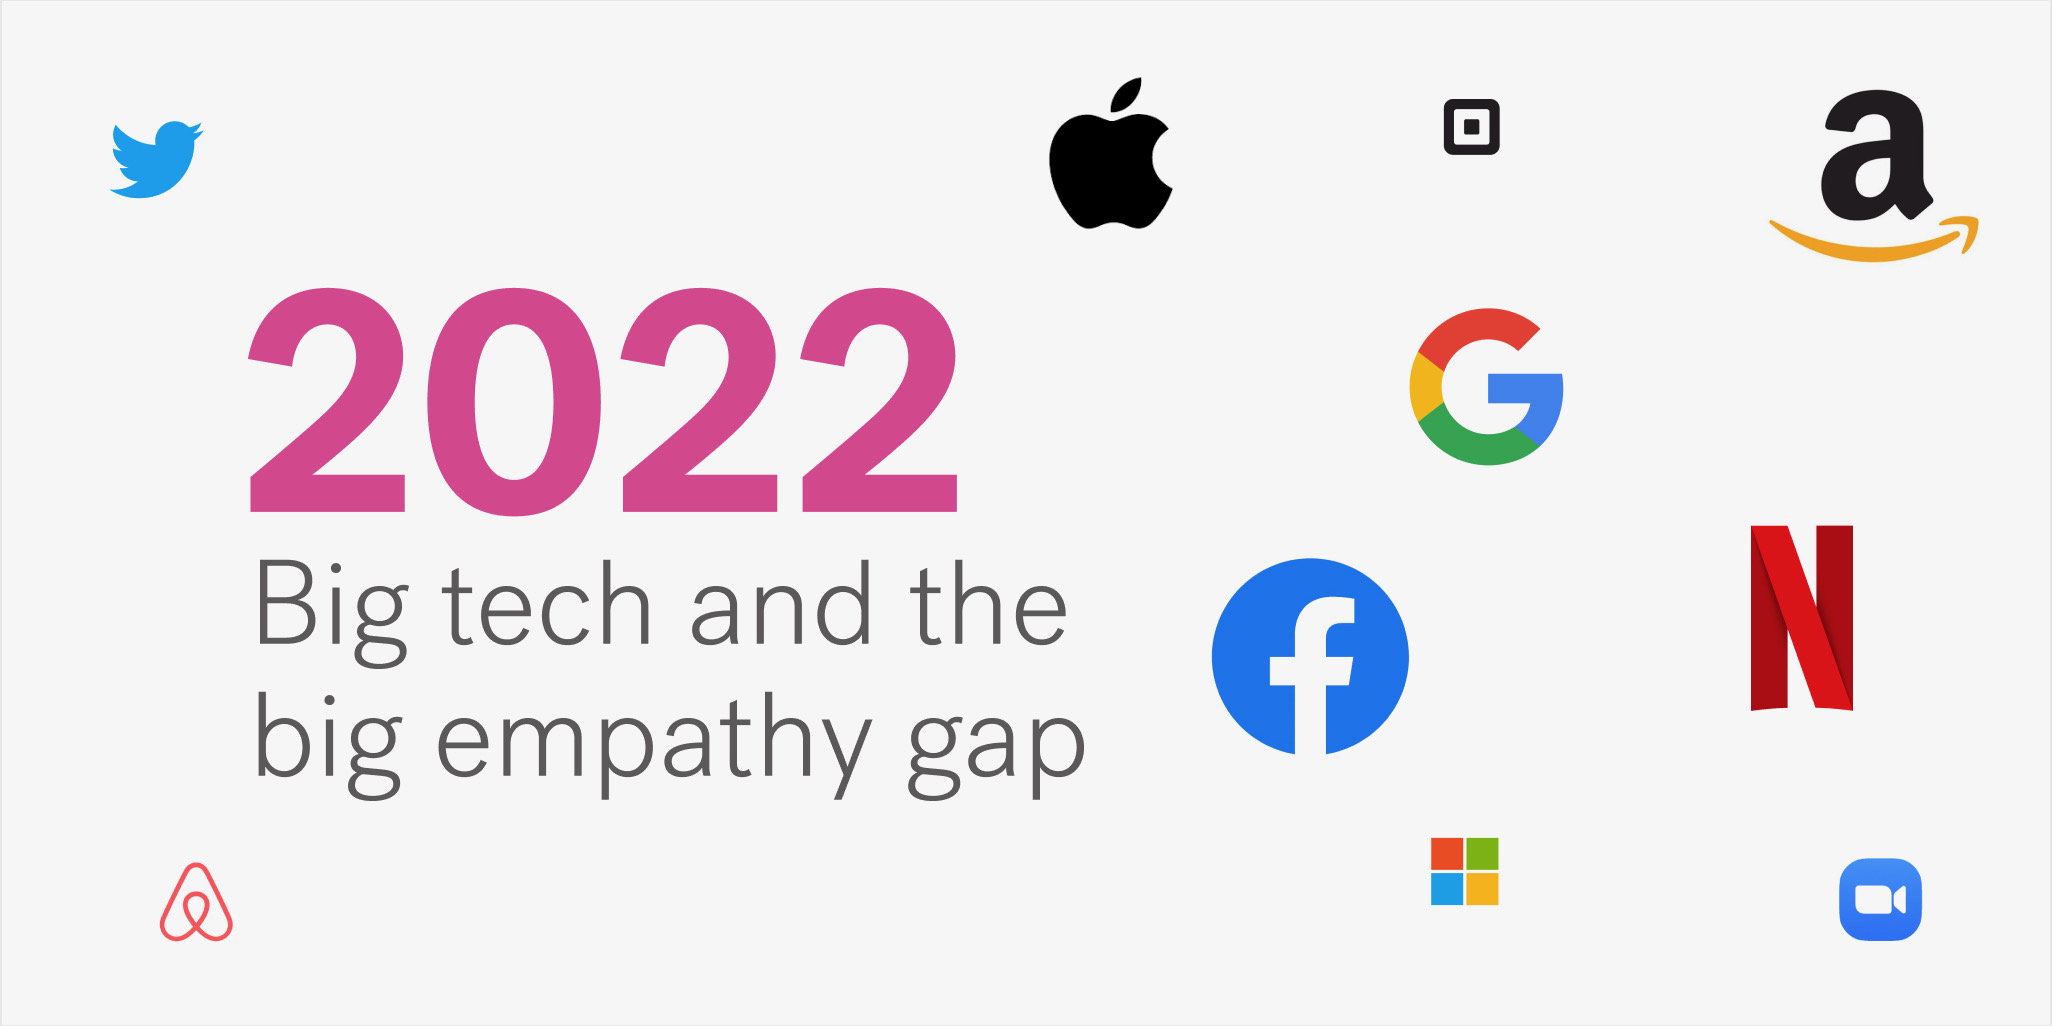 Text reads "2022 Big tech and the big empathy gap" surrounded by logos of Apple, Google, Facebook, Microsoft, Amazon, Twitter, AirBnb, Square, Zoom, and Netflix